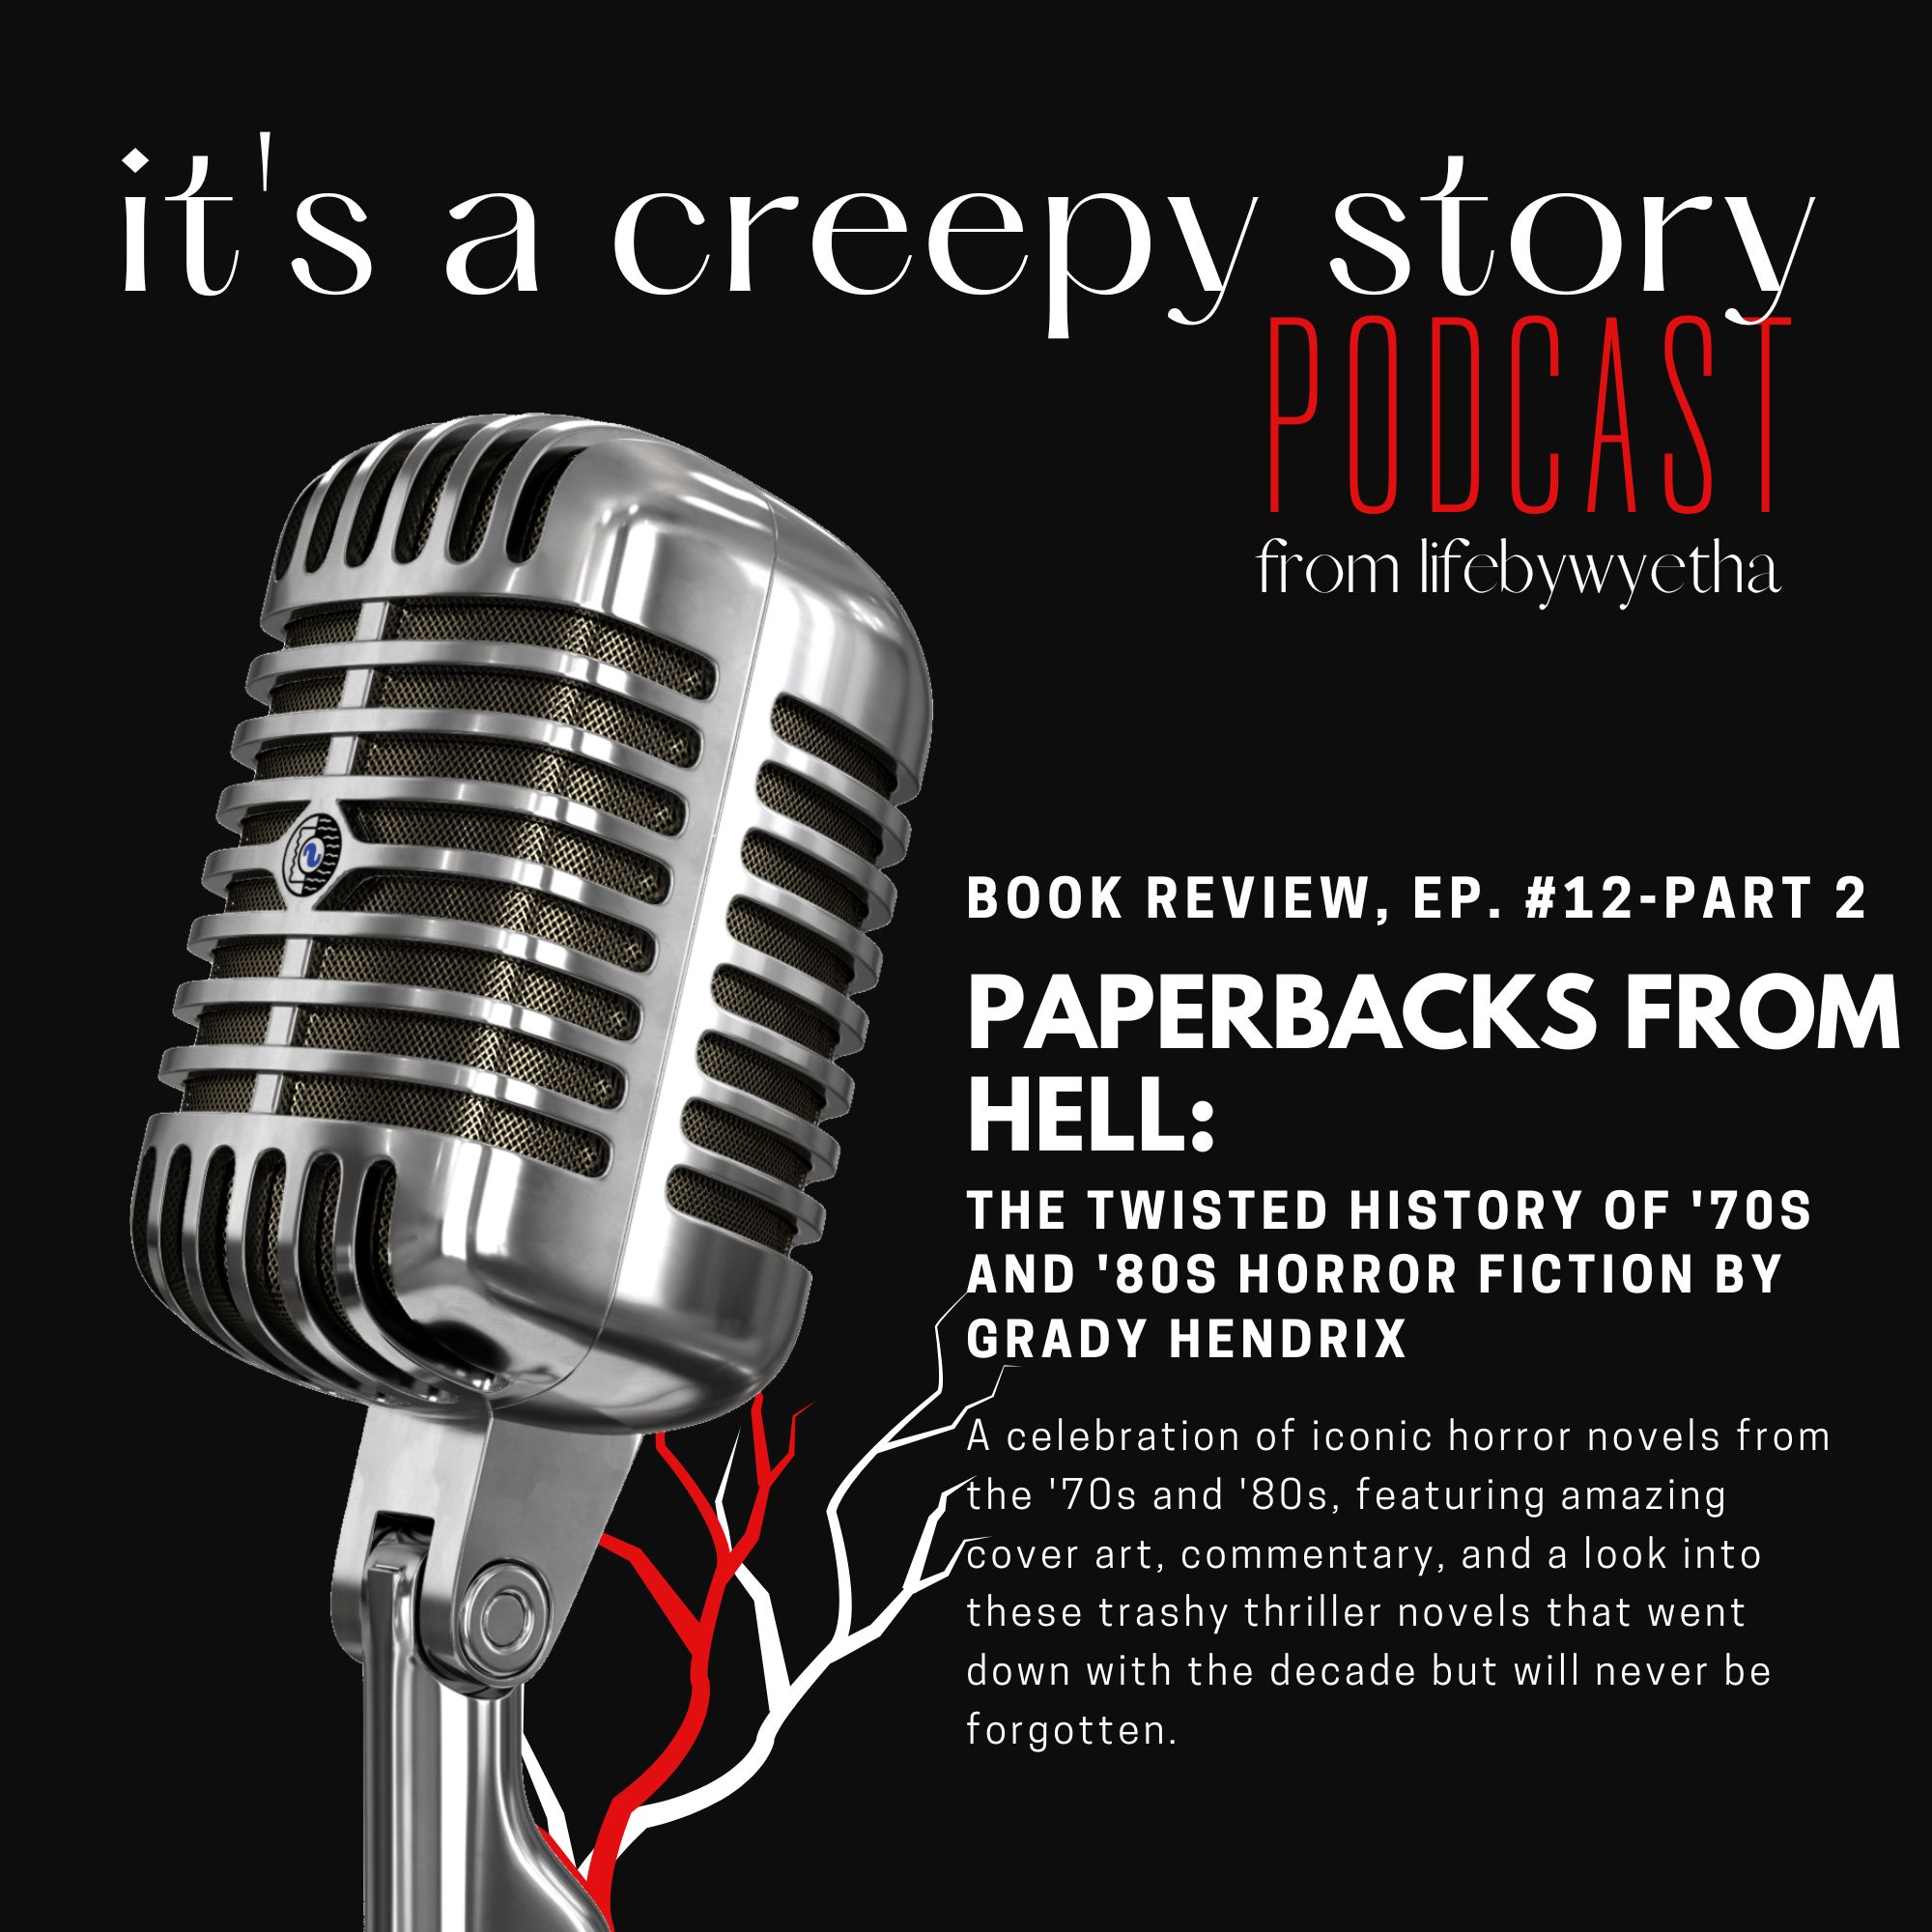 Podcast Sn. 2, It’s a Creepy Story: Episode #12